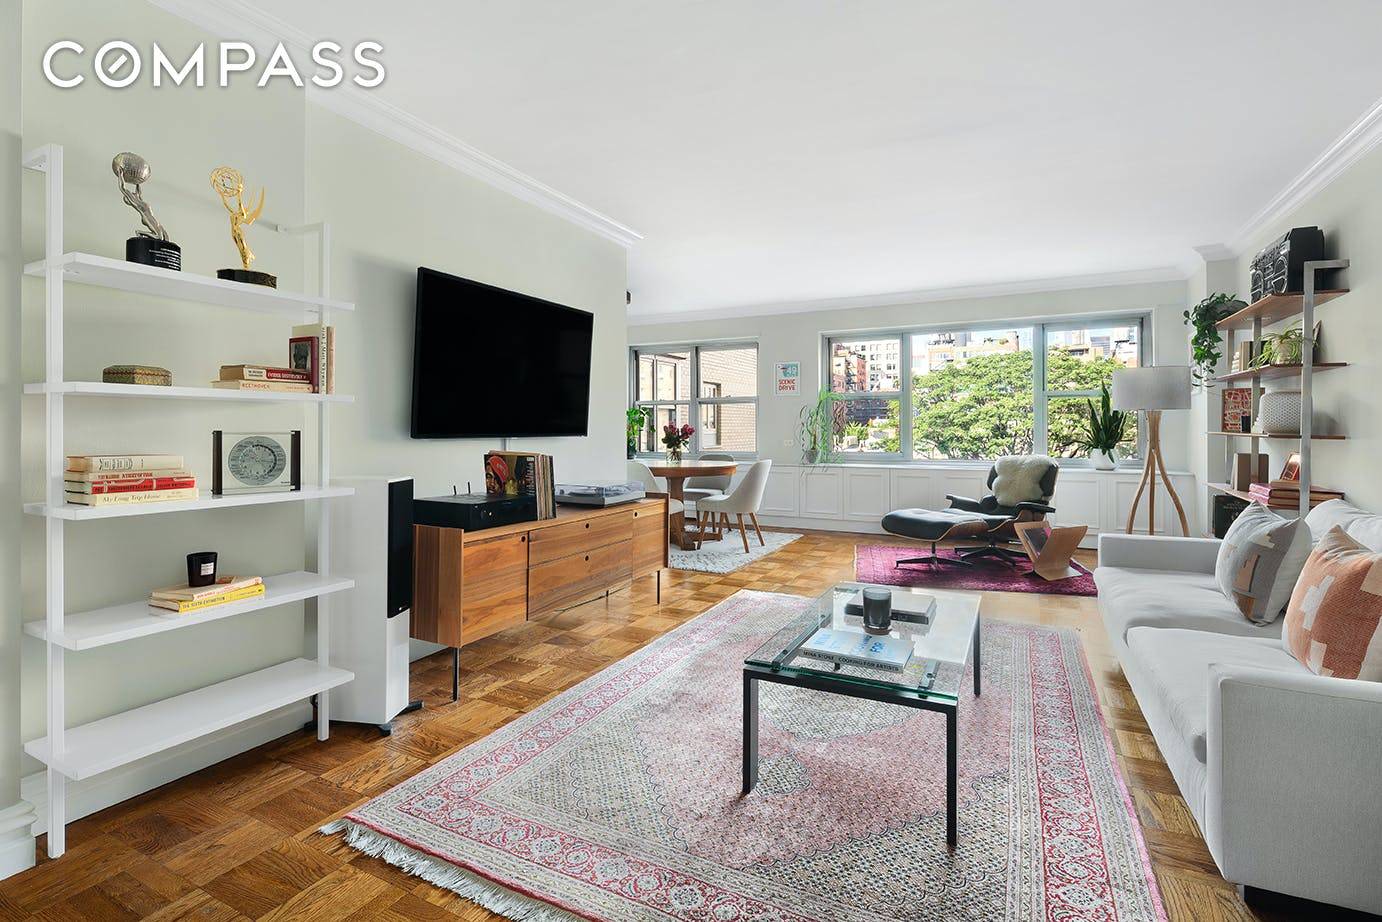 20 East 9th Street, Unit 9X, is situated in the heart of Greenwich Village.